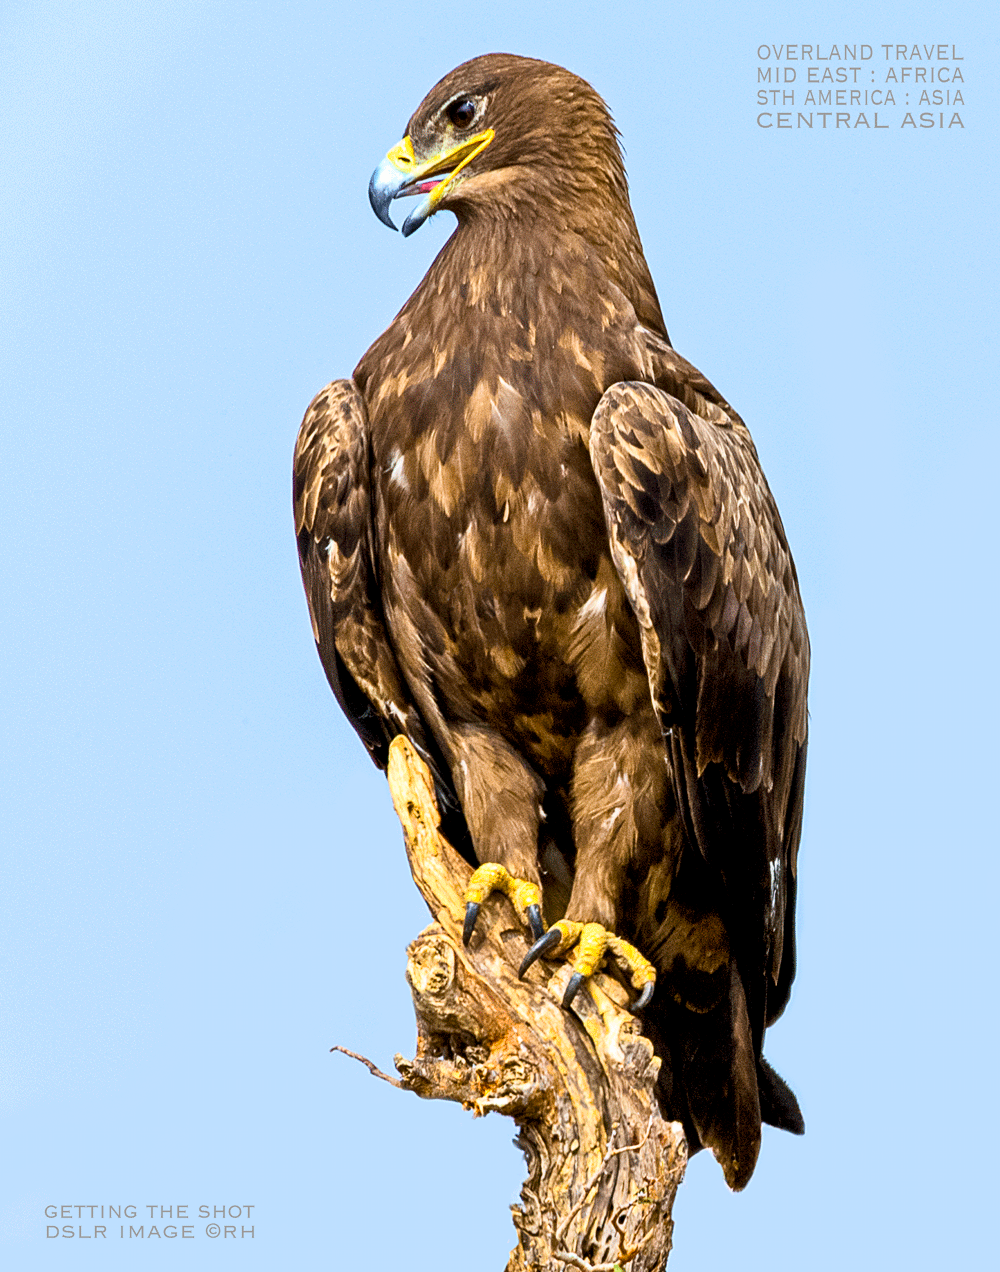 solo overland travel Middle East, South America, Africa, central & south Asia, DSLR raptor image by Rick Hemi, 